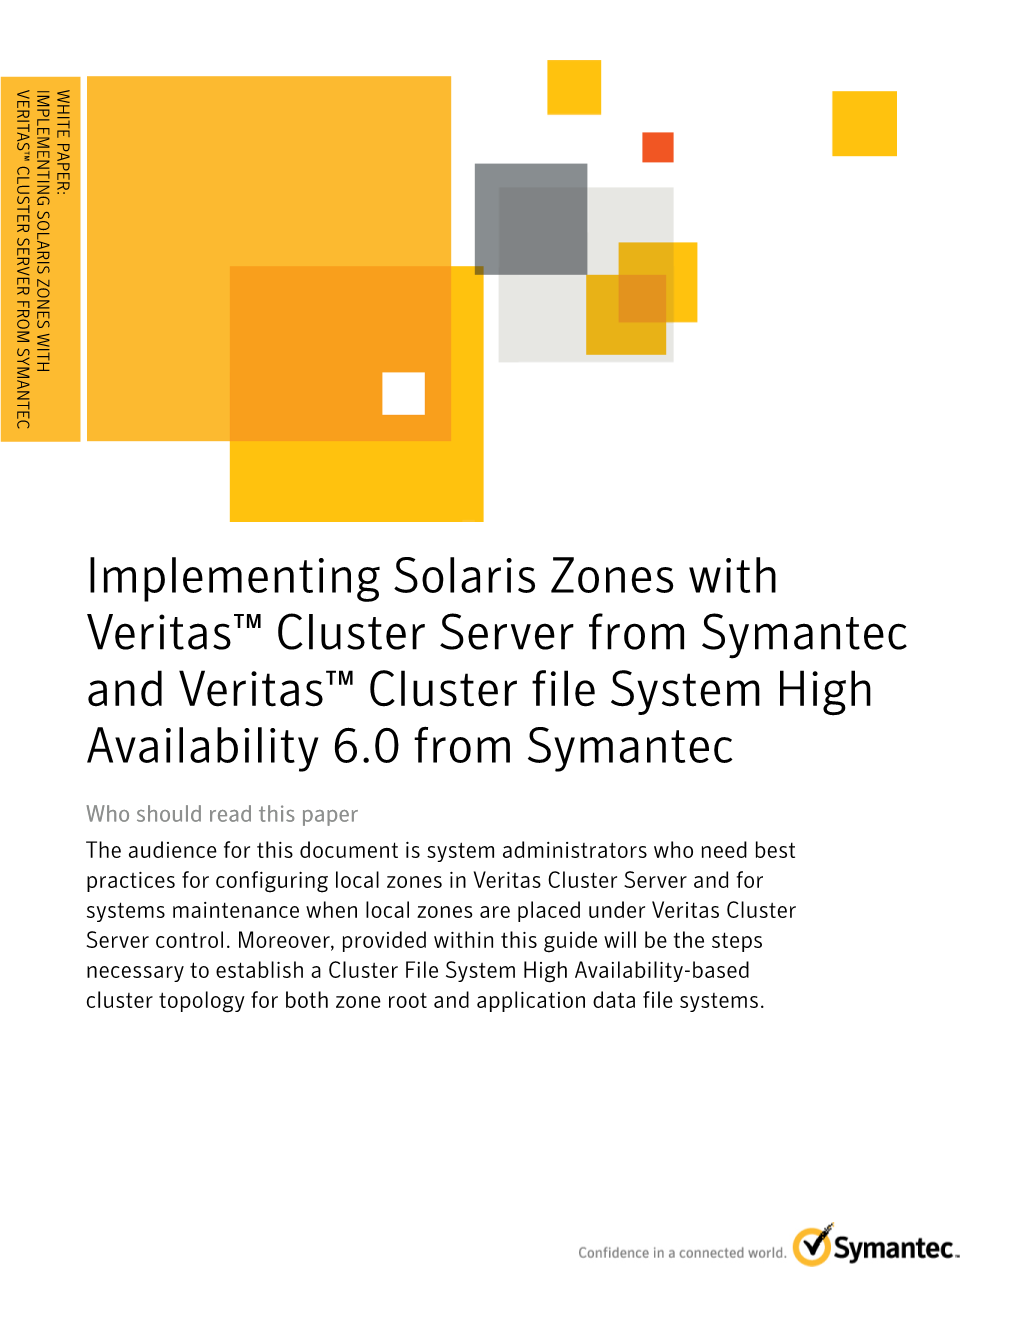 Implementing Solaris Zones with Veritas™ Cluster Server from Symantec and Veritas™ Cluster File System High Availability 6.0 from Symantec